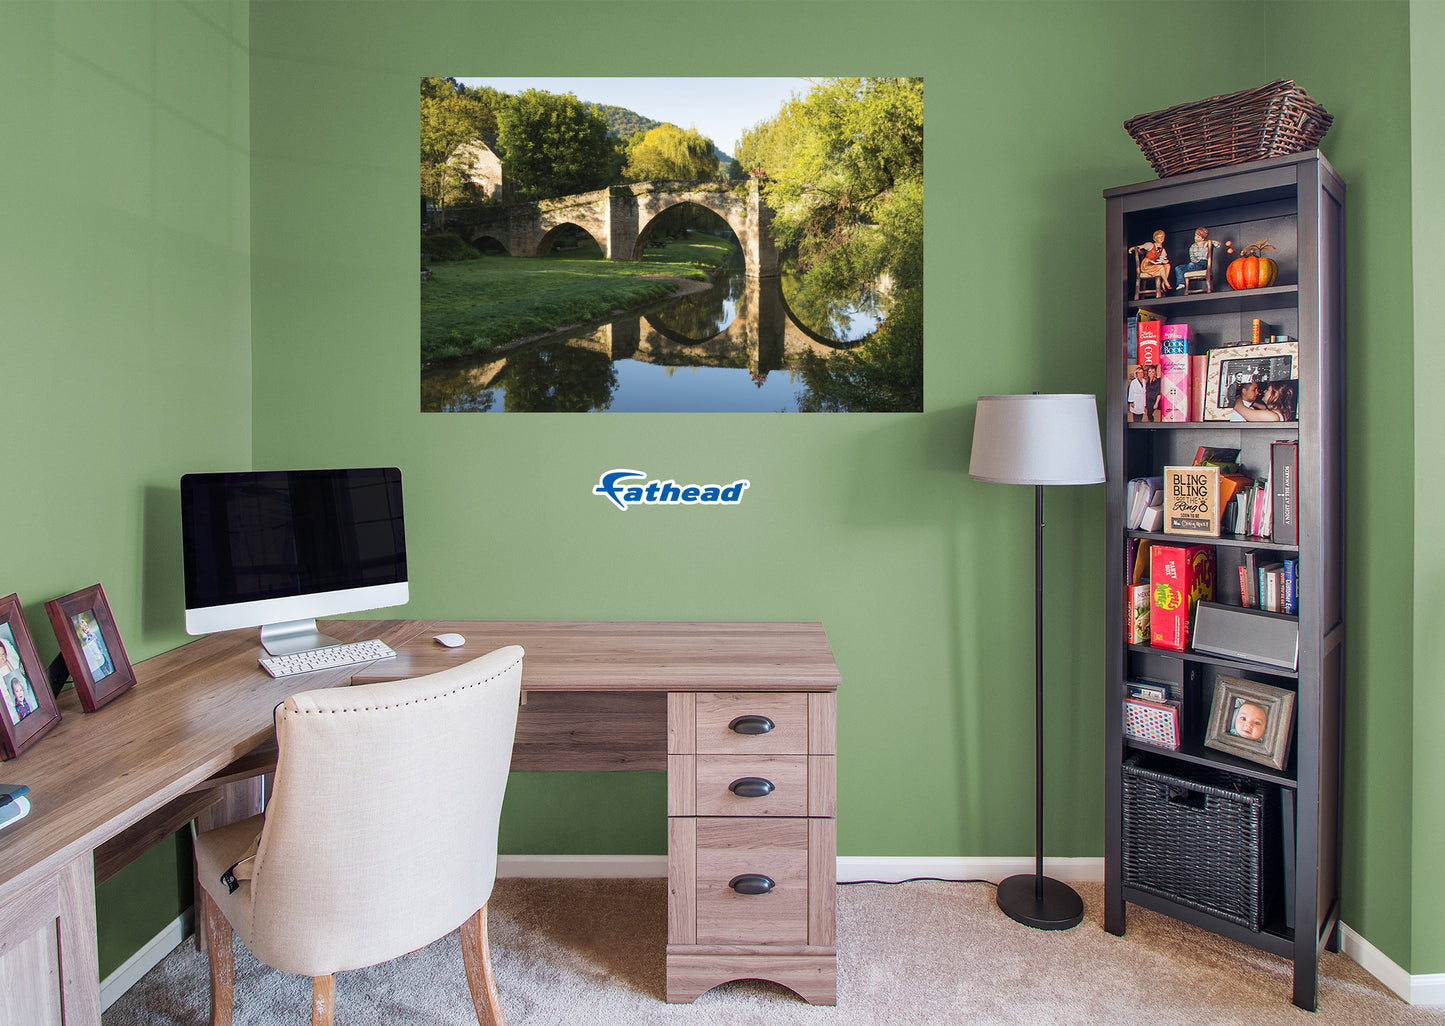 Generic Scenery: The Bridge Realistic Poster        -   Removable     Adhesive Decal